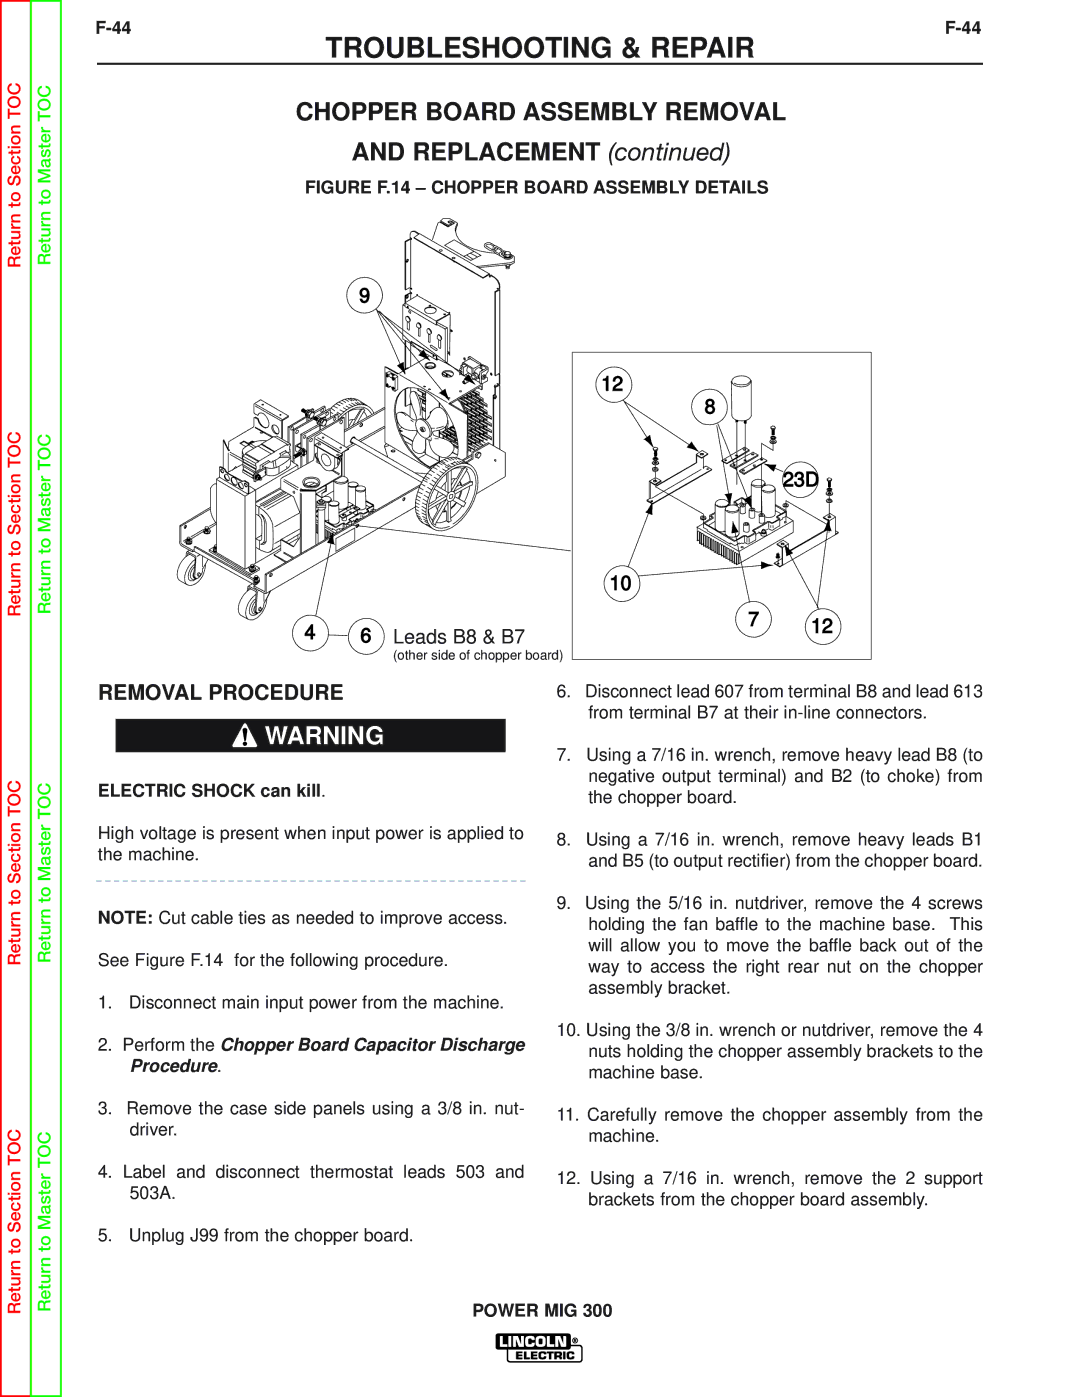 Lincoln Electric SVM160-B service manual Chopper Board Assembly Removal, Replacement 